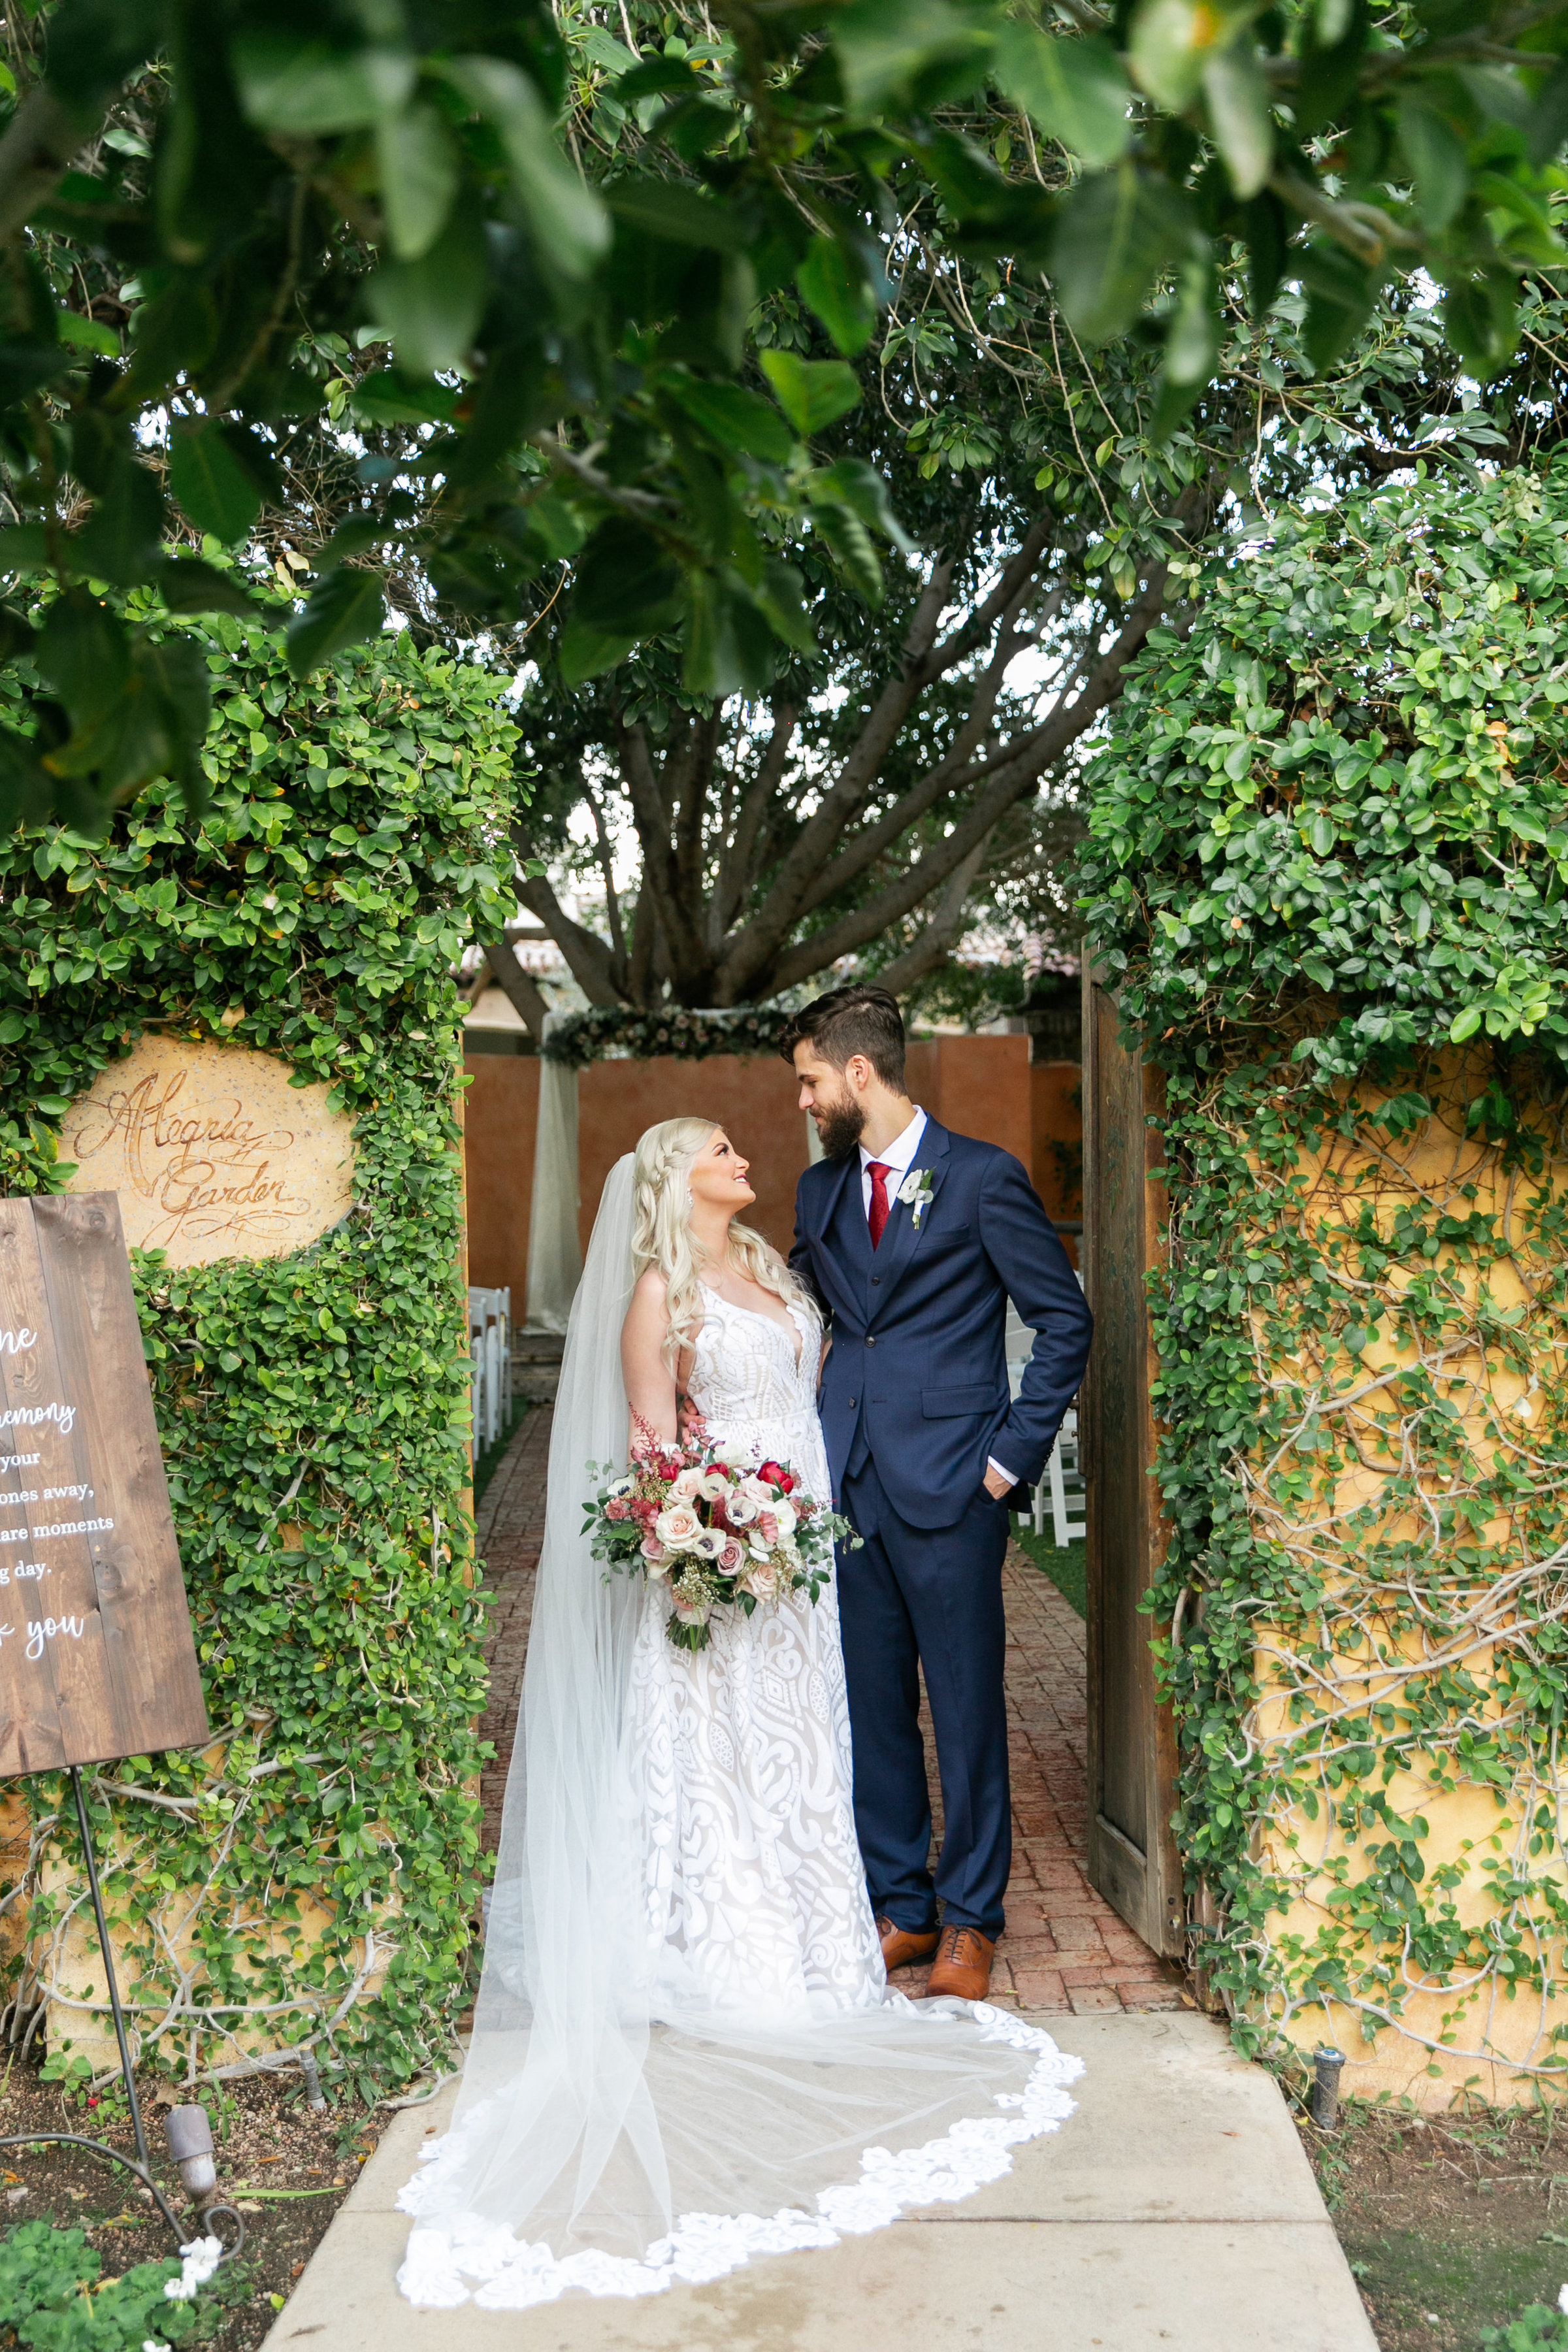 Karlie Colleen Photography - The Royal Palms Wedding - Some Like It Classic - Alex & Sam-471